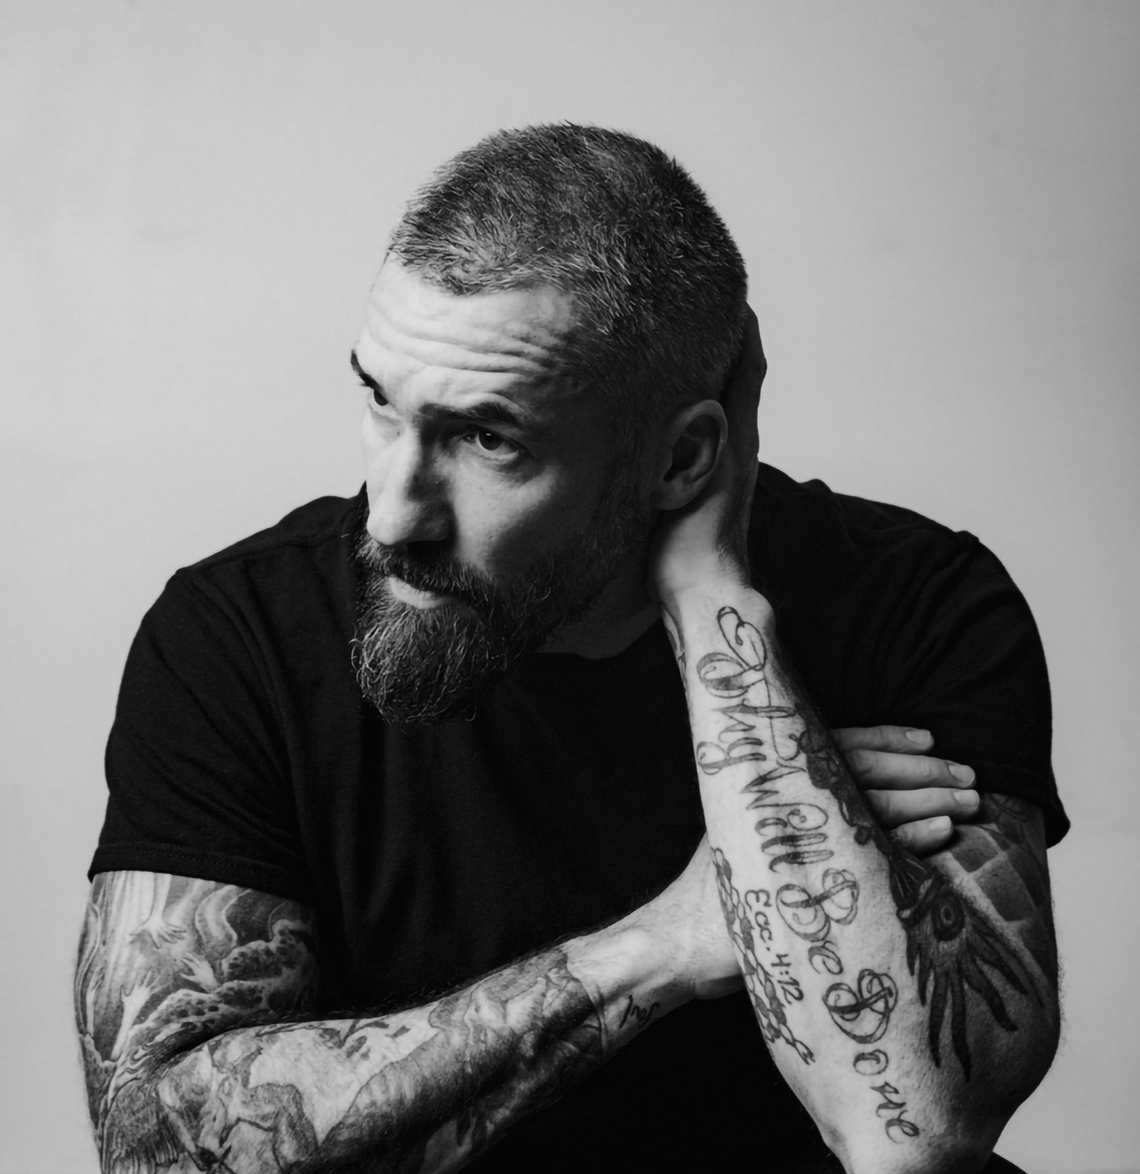 Clint Lowery Shares "Alive" Video